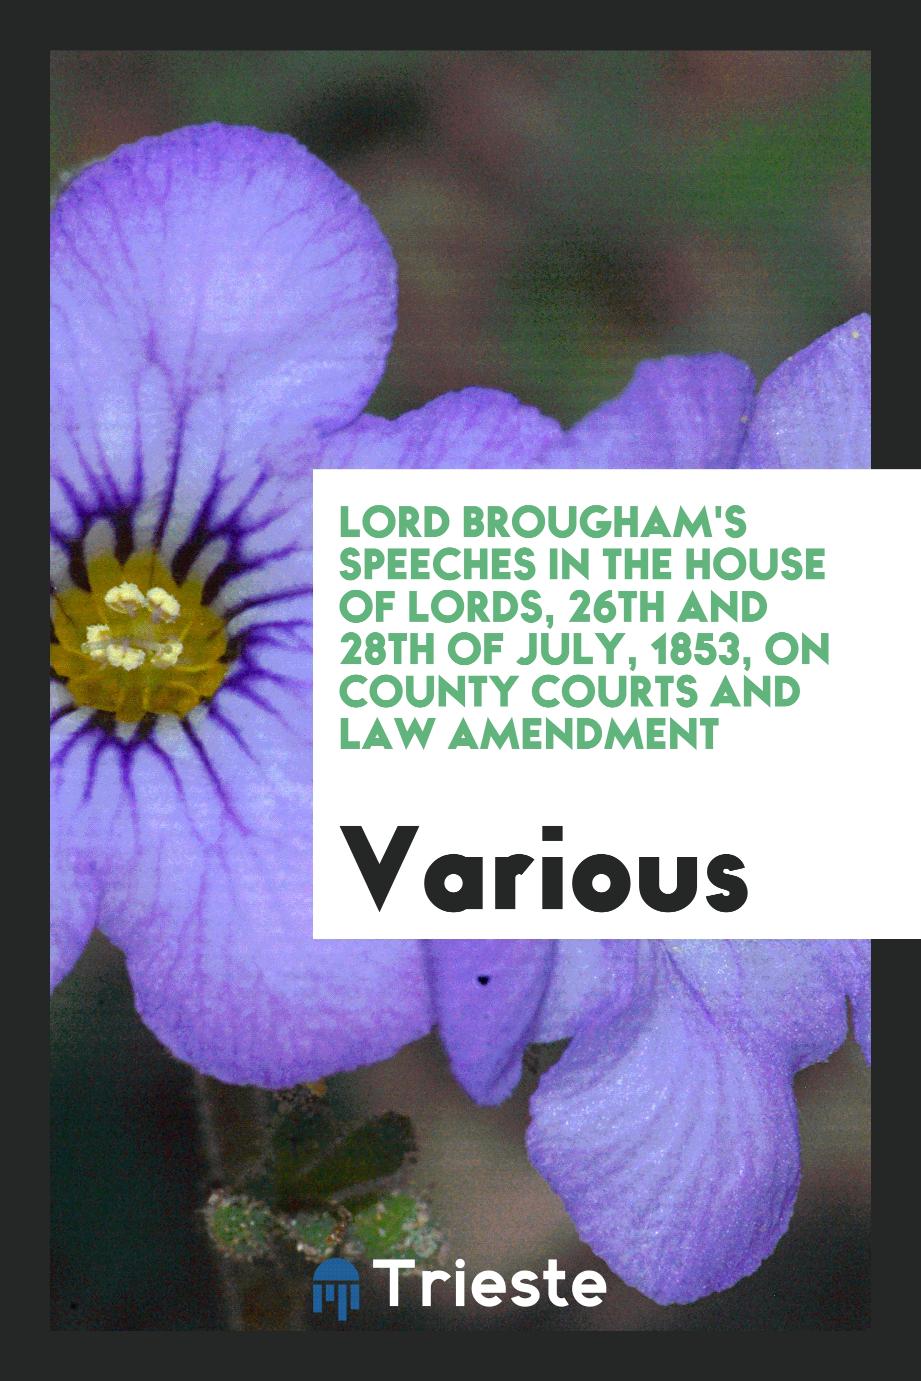 Lord Brougham's Speeches in the House of Lords, 26th and 28th of July, 1853, on County Courts and law amendment